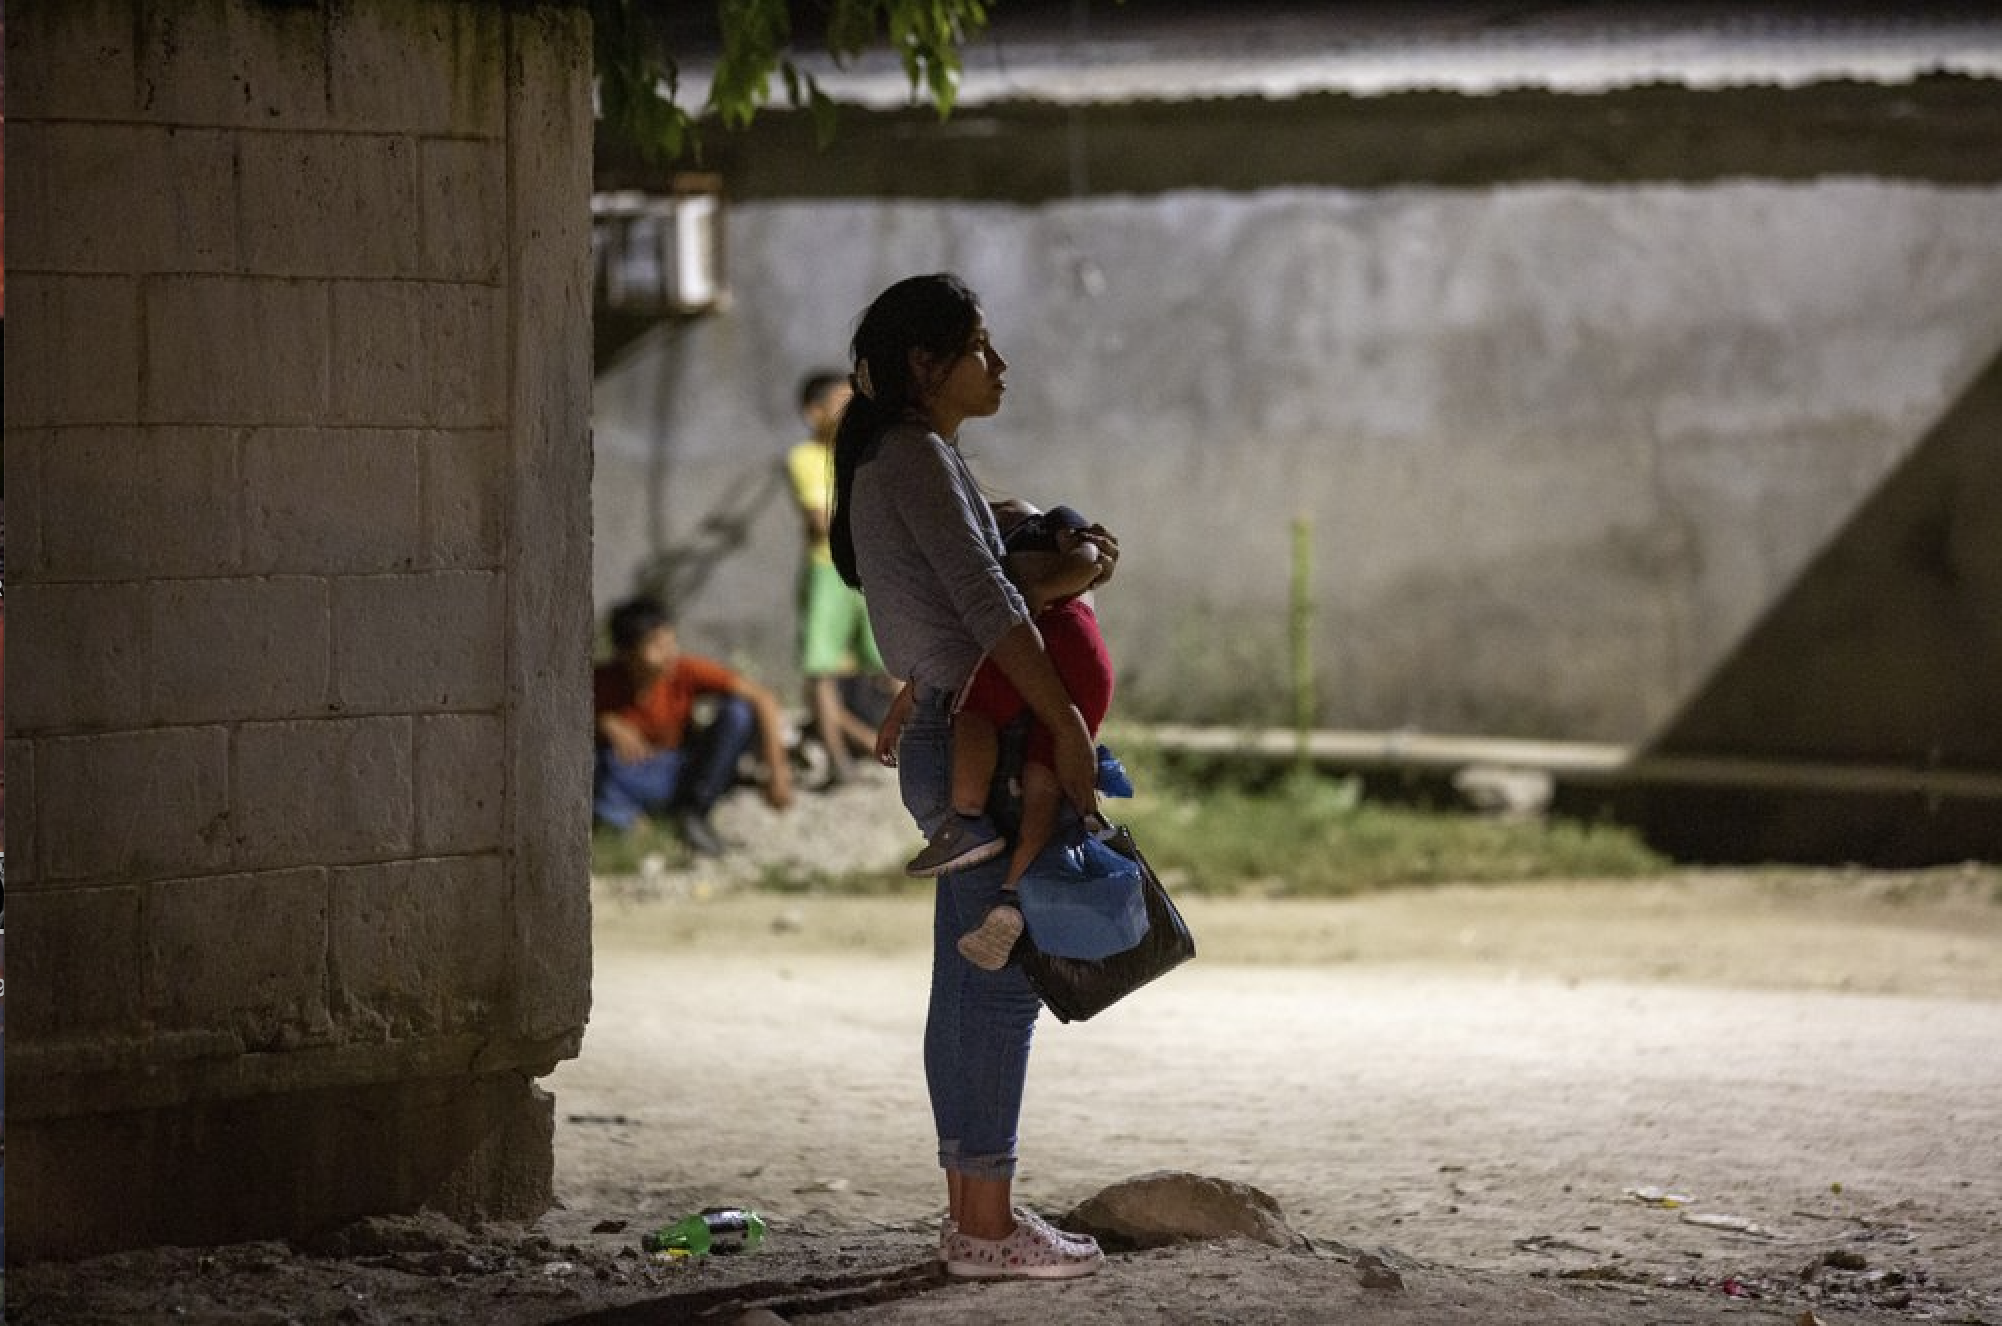 A woman holds a child near a crime scene as forensic workers inspect a body on the street in the Rivera Hernandez neighborhood of San Pedro Sula, Honduras, on Nov. 30, 2019. Image by Moises Castillo/ AP Photo. Honduras, 2019.